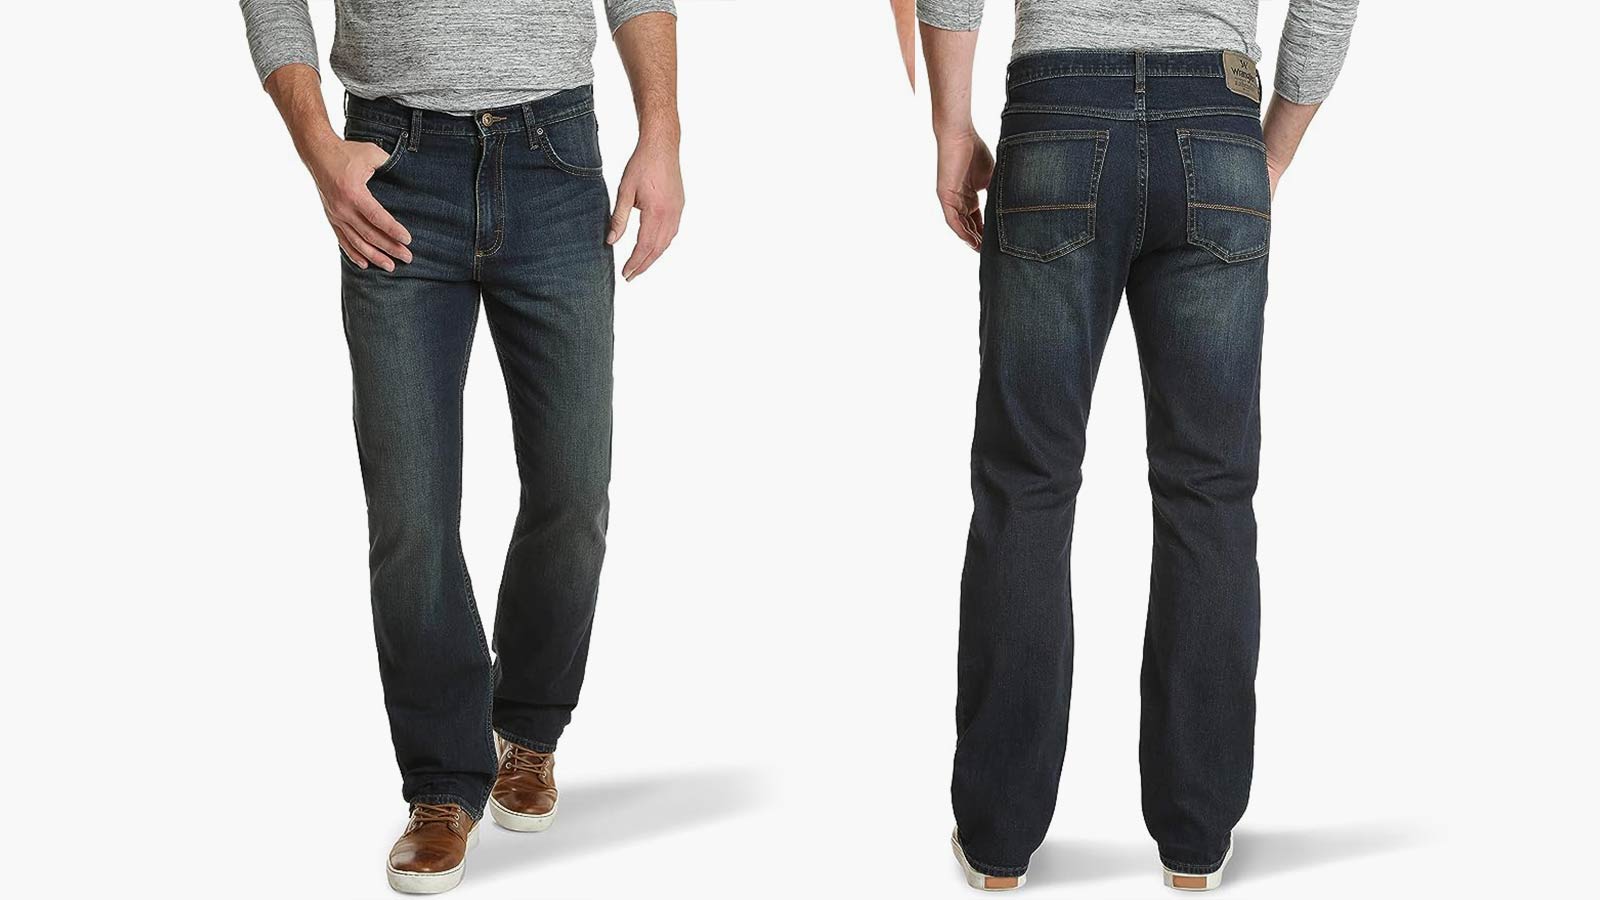 Best Jeans For Men At Every Budget - IMBOLDN